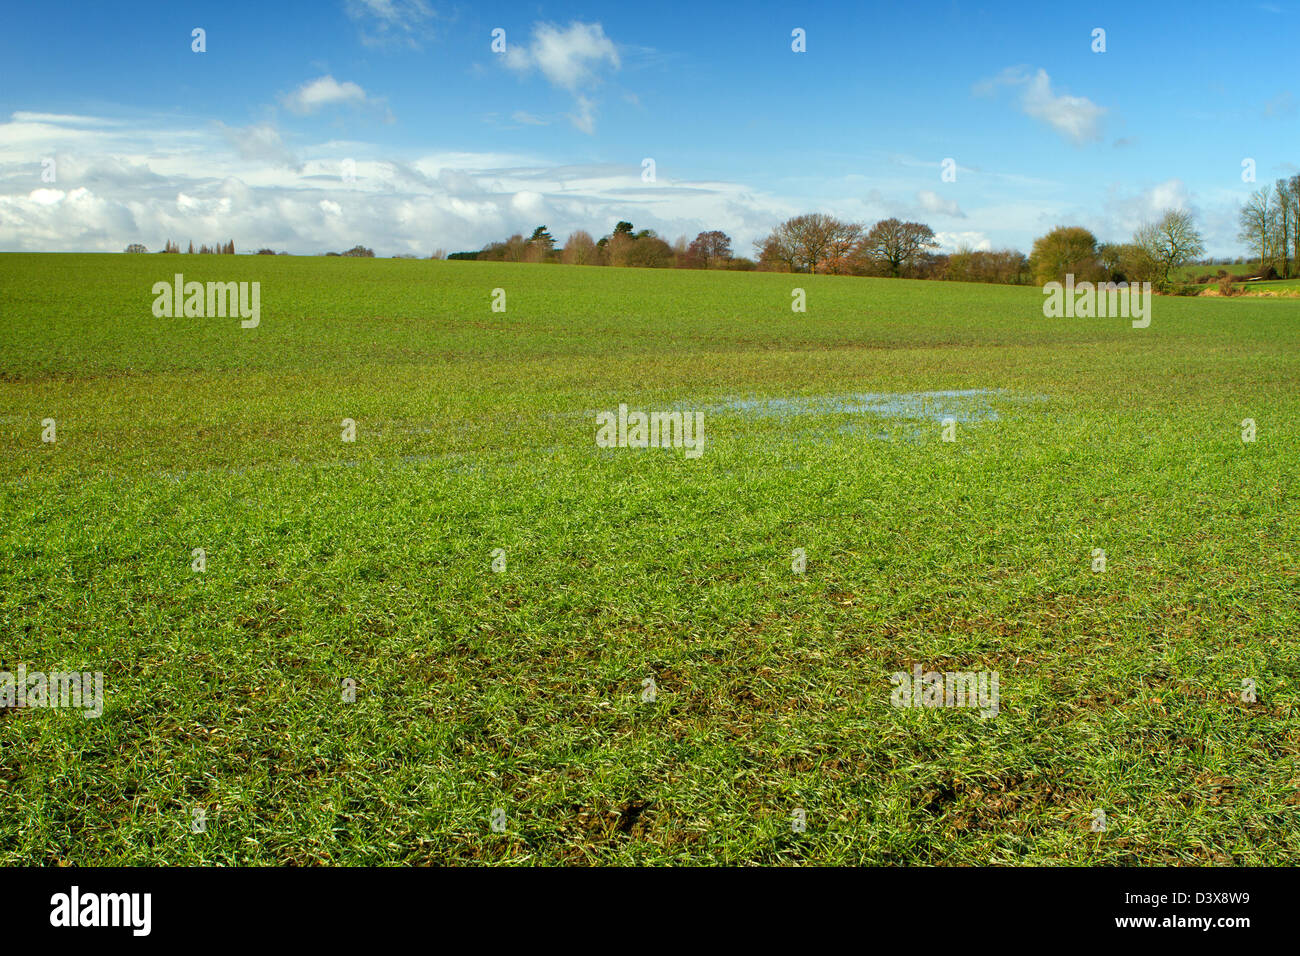 Rayne, Essex, UK. A view of the Beautiful Essex countryside near Braintree on a bright sunny day Stock Photo